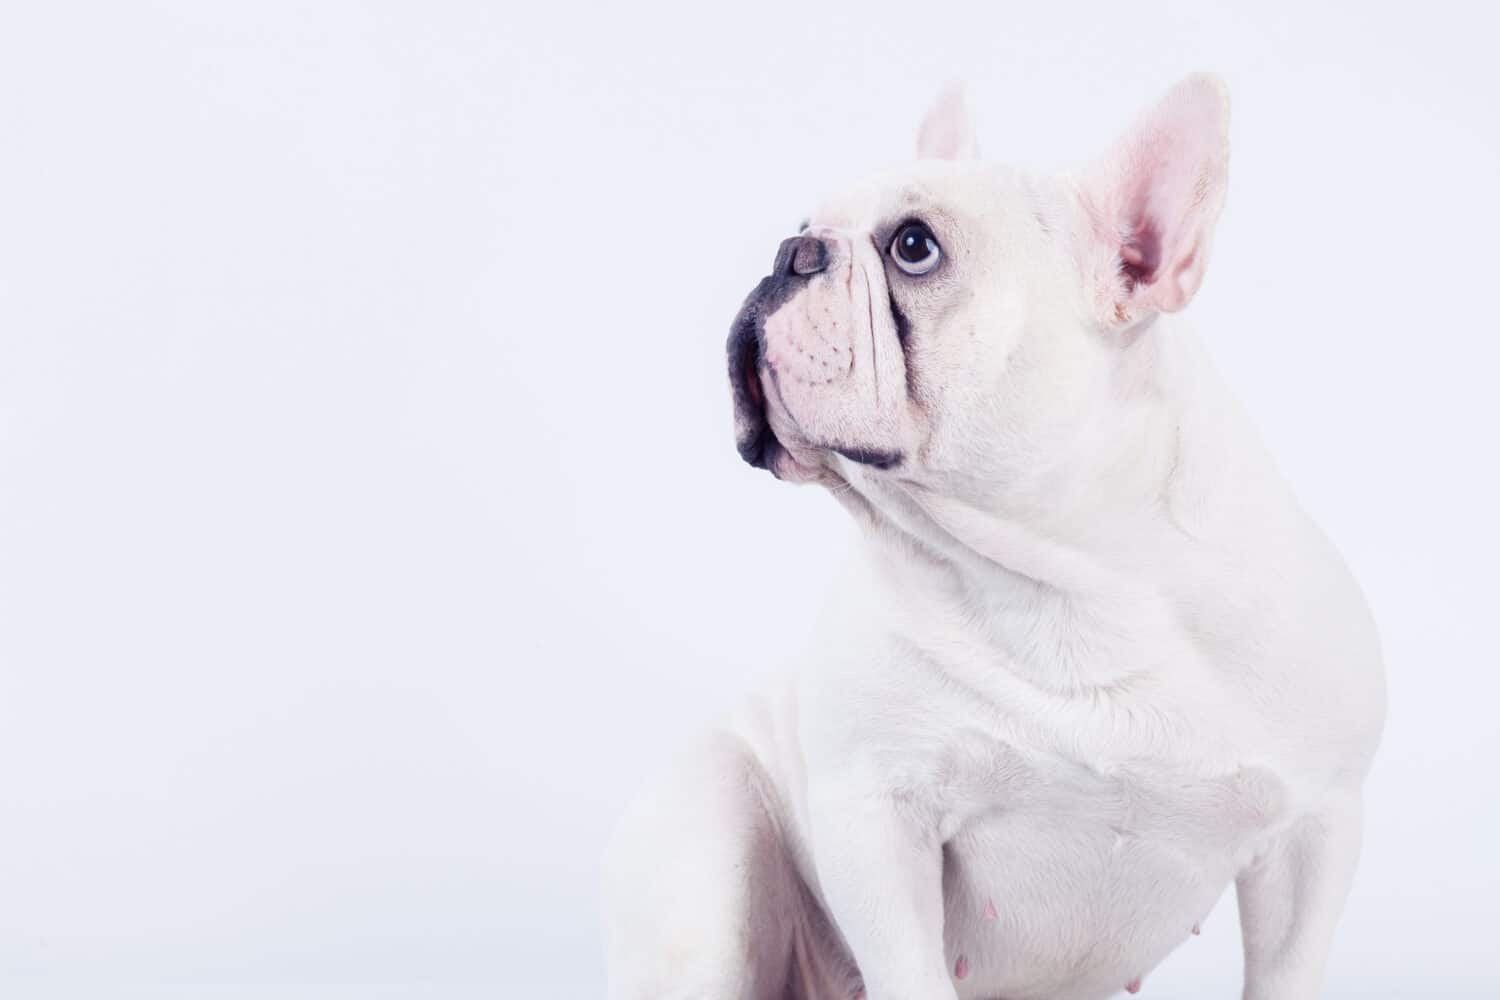 Adorable white french bulldog sitting down and looking up  isolated on white background.